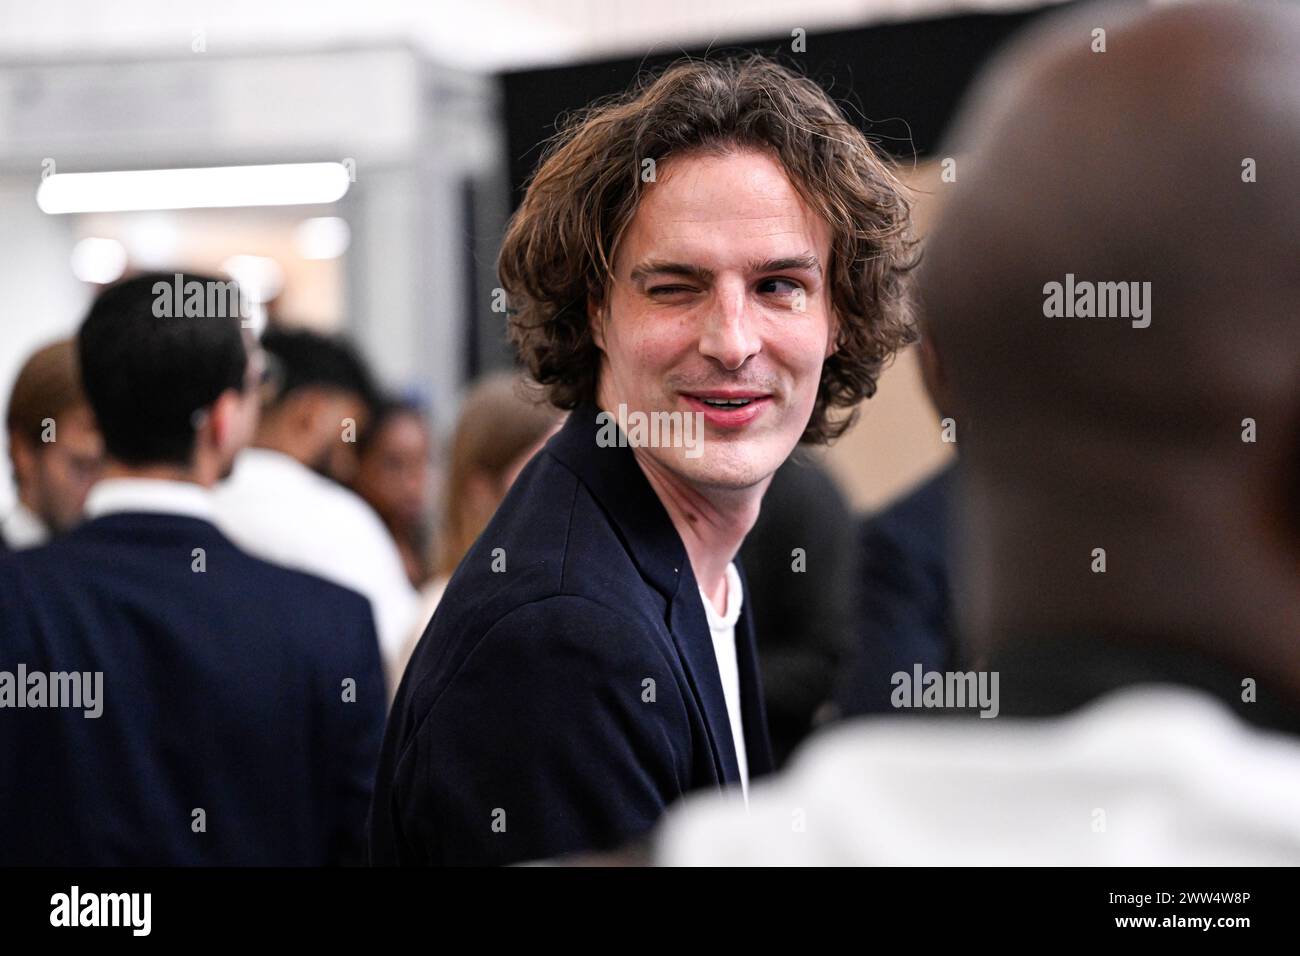 Paul de Saint Sernin during the Olympic Games football tournament final draw at Paris 2024 HQ on March 20, 2024 in Paris, France. Stock Photo